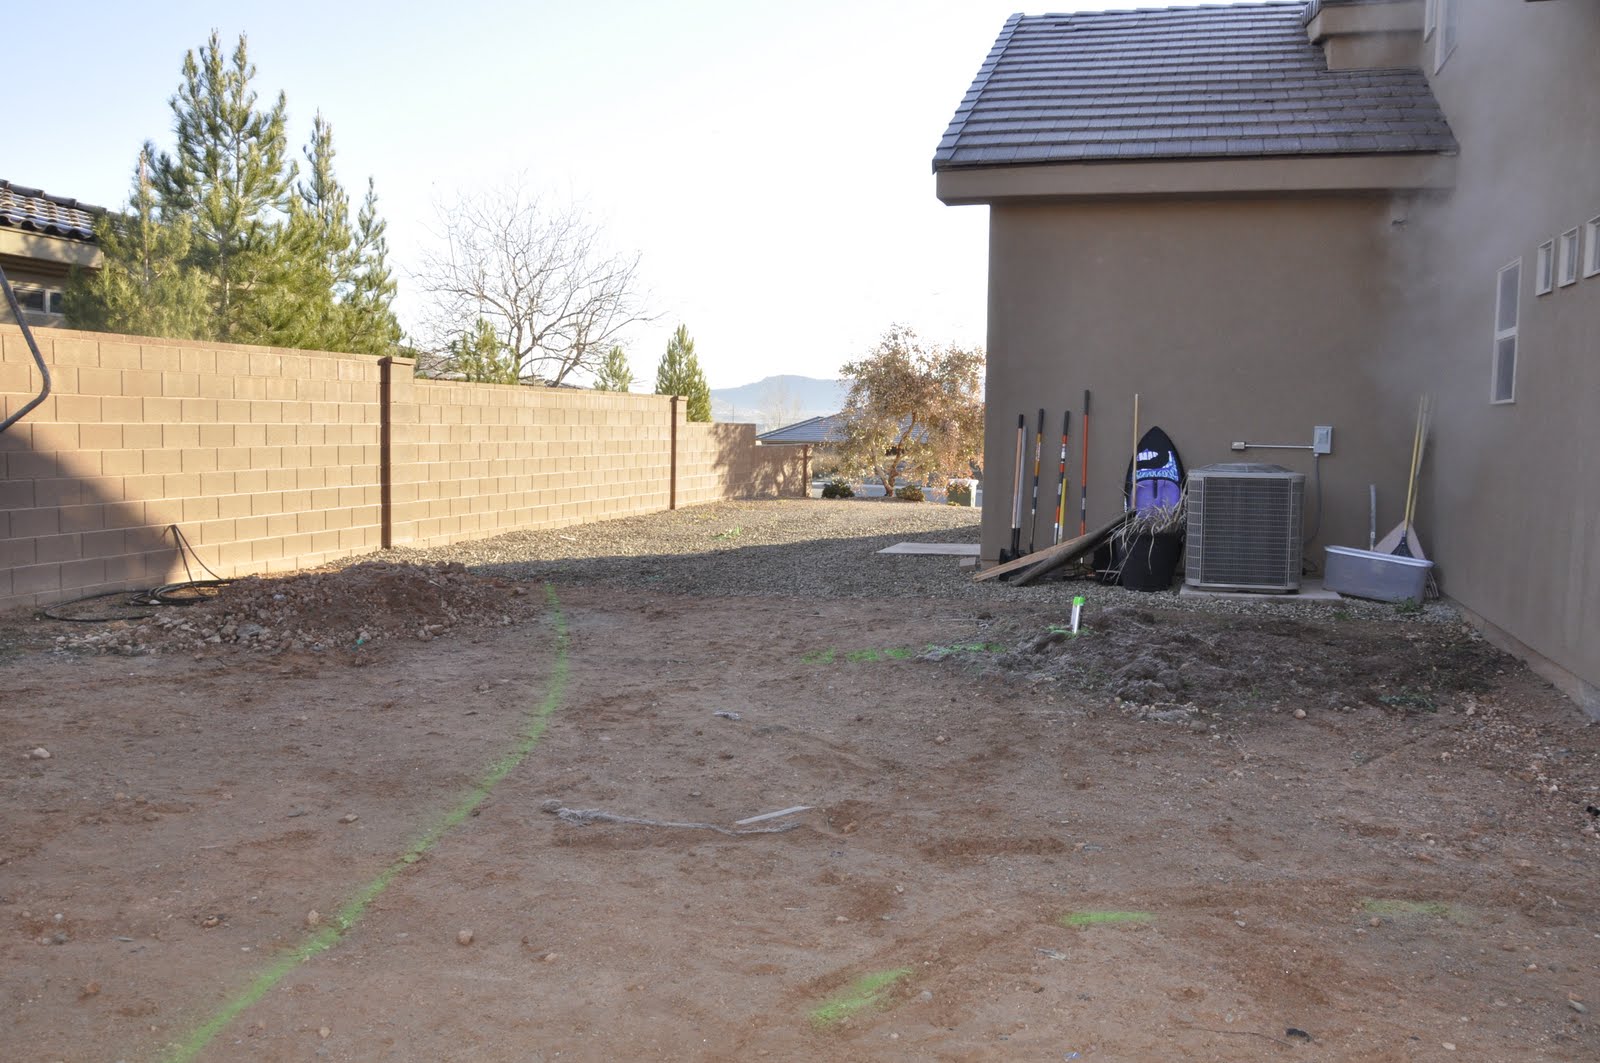 Concrete patio project: Backyard Landscaping update